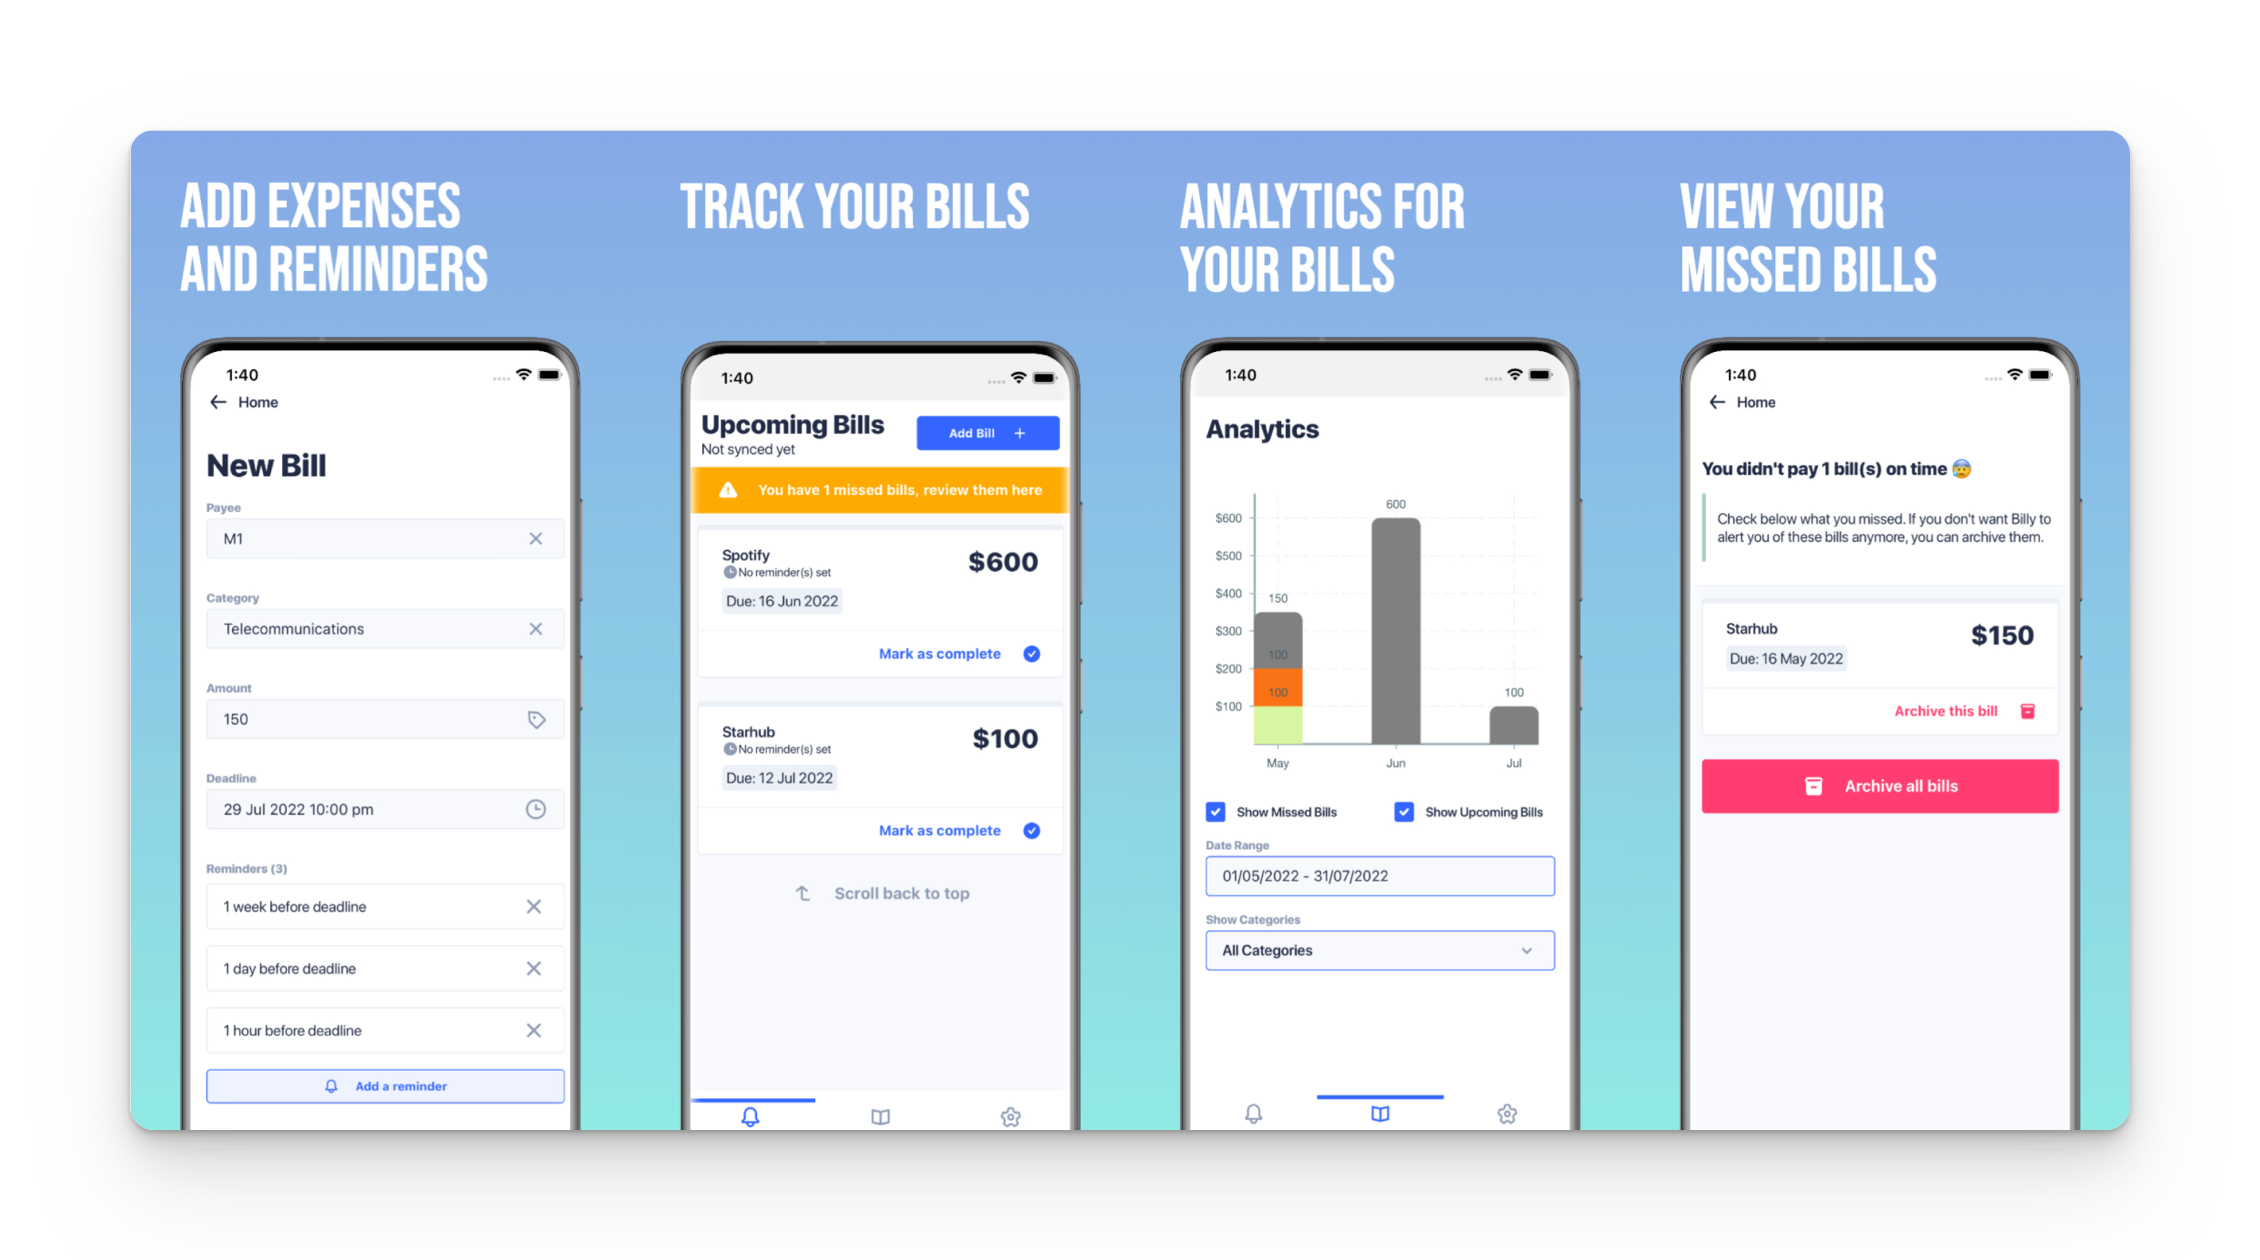 Add expenses and reminders at the New Bill Screen, Track your Bills at the Home Page/Upcoming Bills Screen, and Bar chart analytics of your expenses by month.